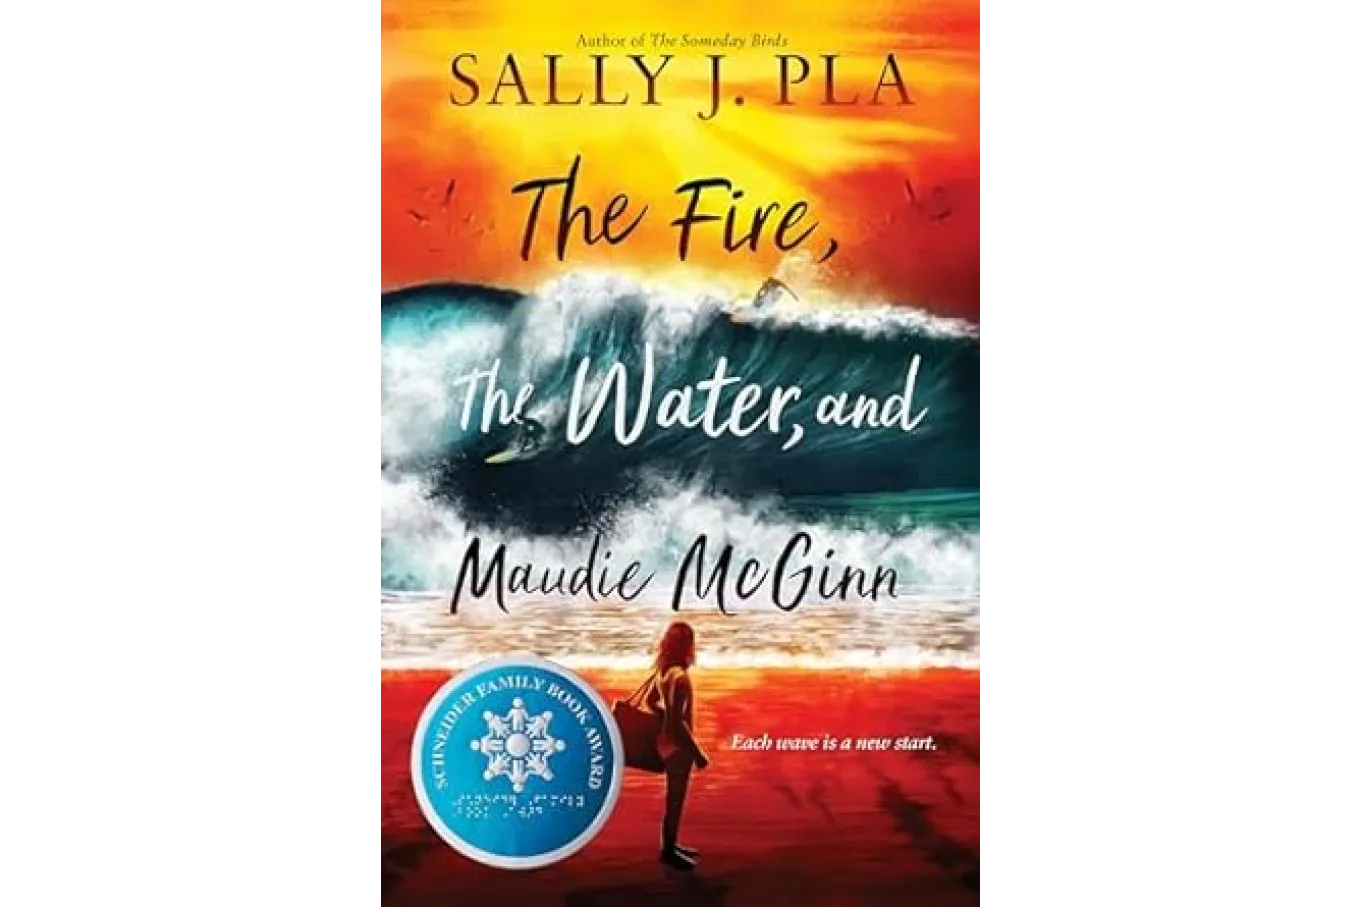 Cover of the fire the water and maudie mcginn